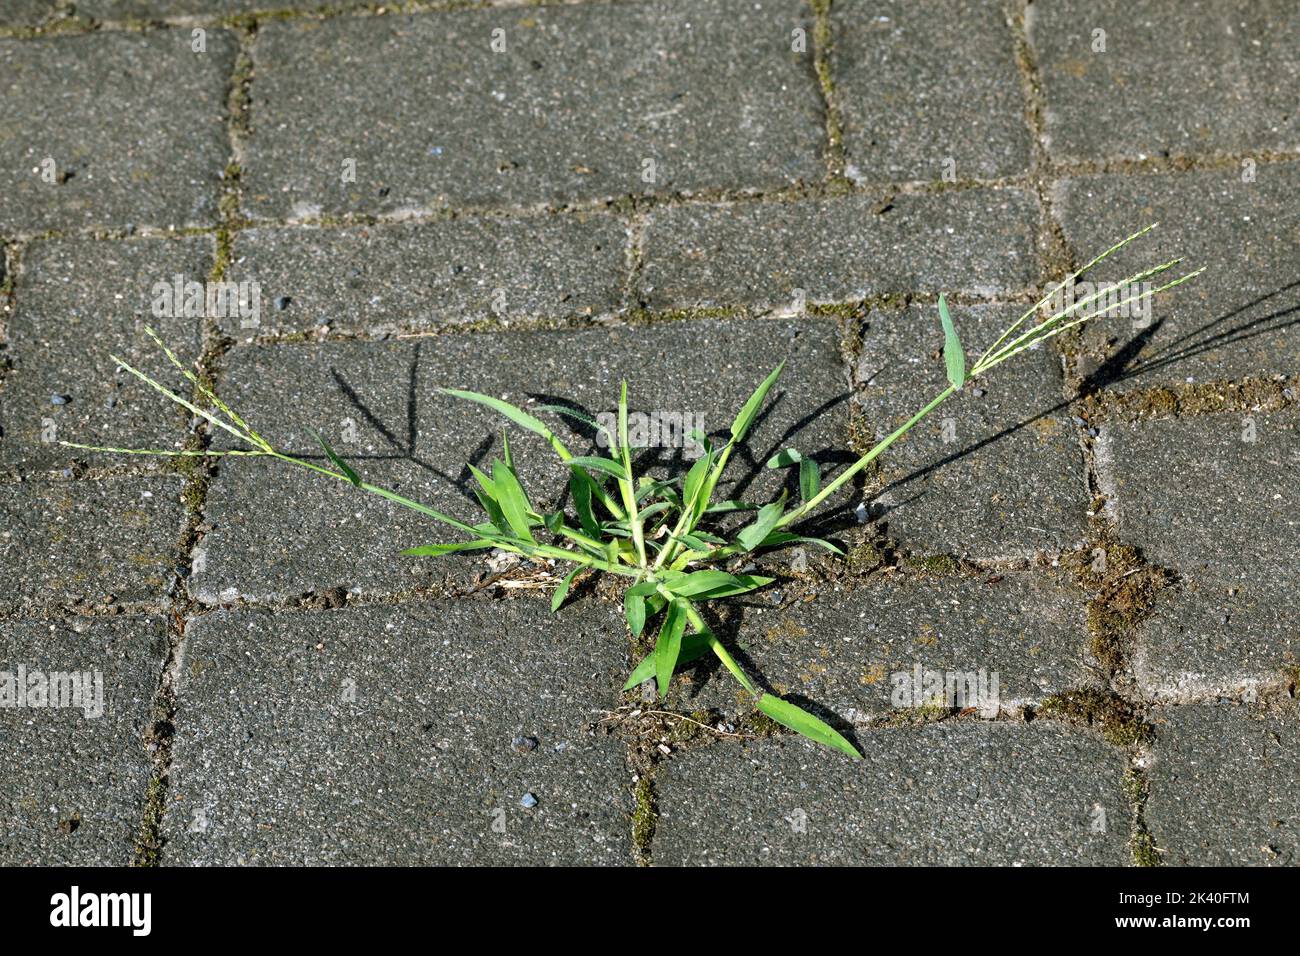 hairy finger-grass, large crabgrass (Digitaria sanguinalis), on a pavement, Germany Stock Photo